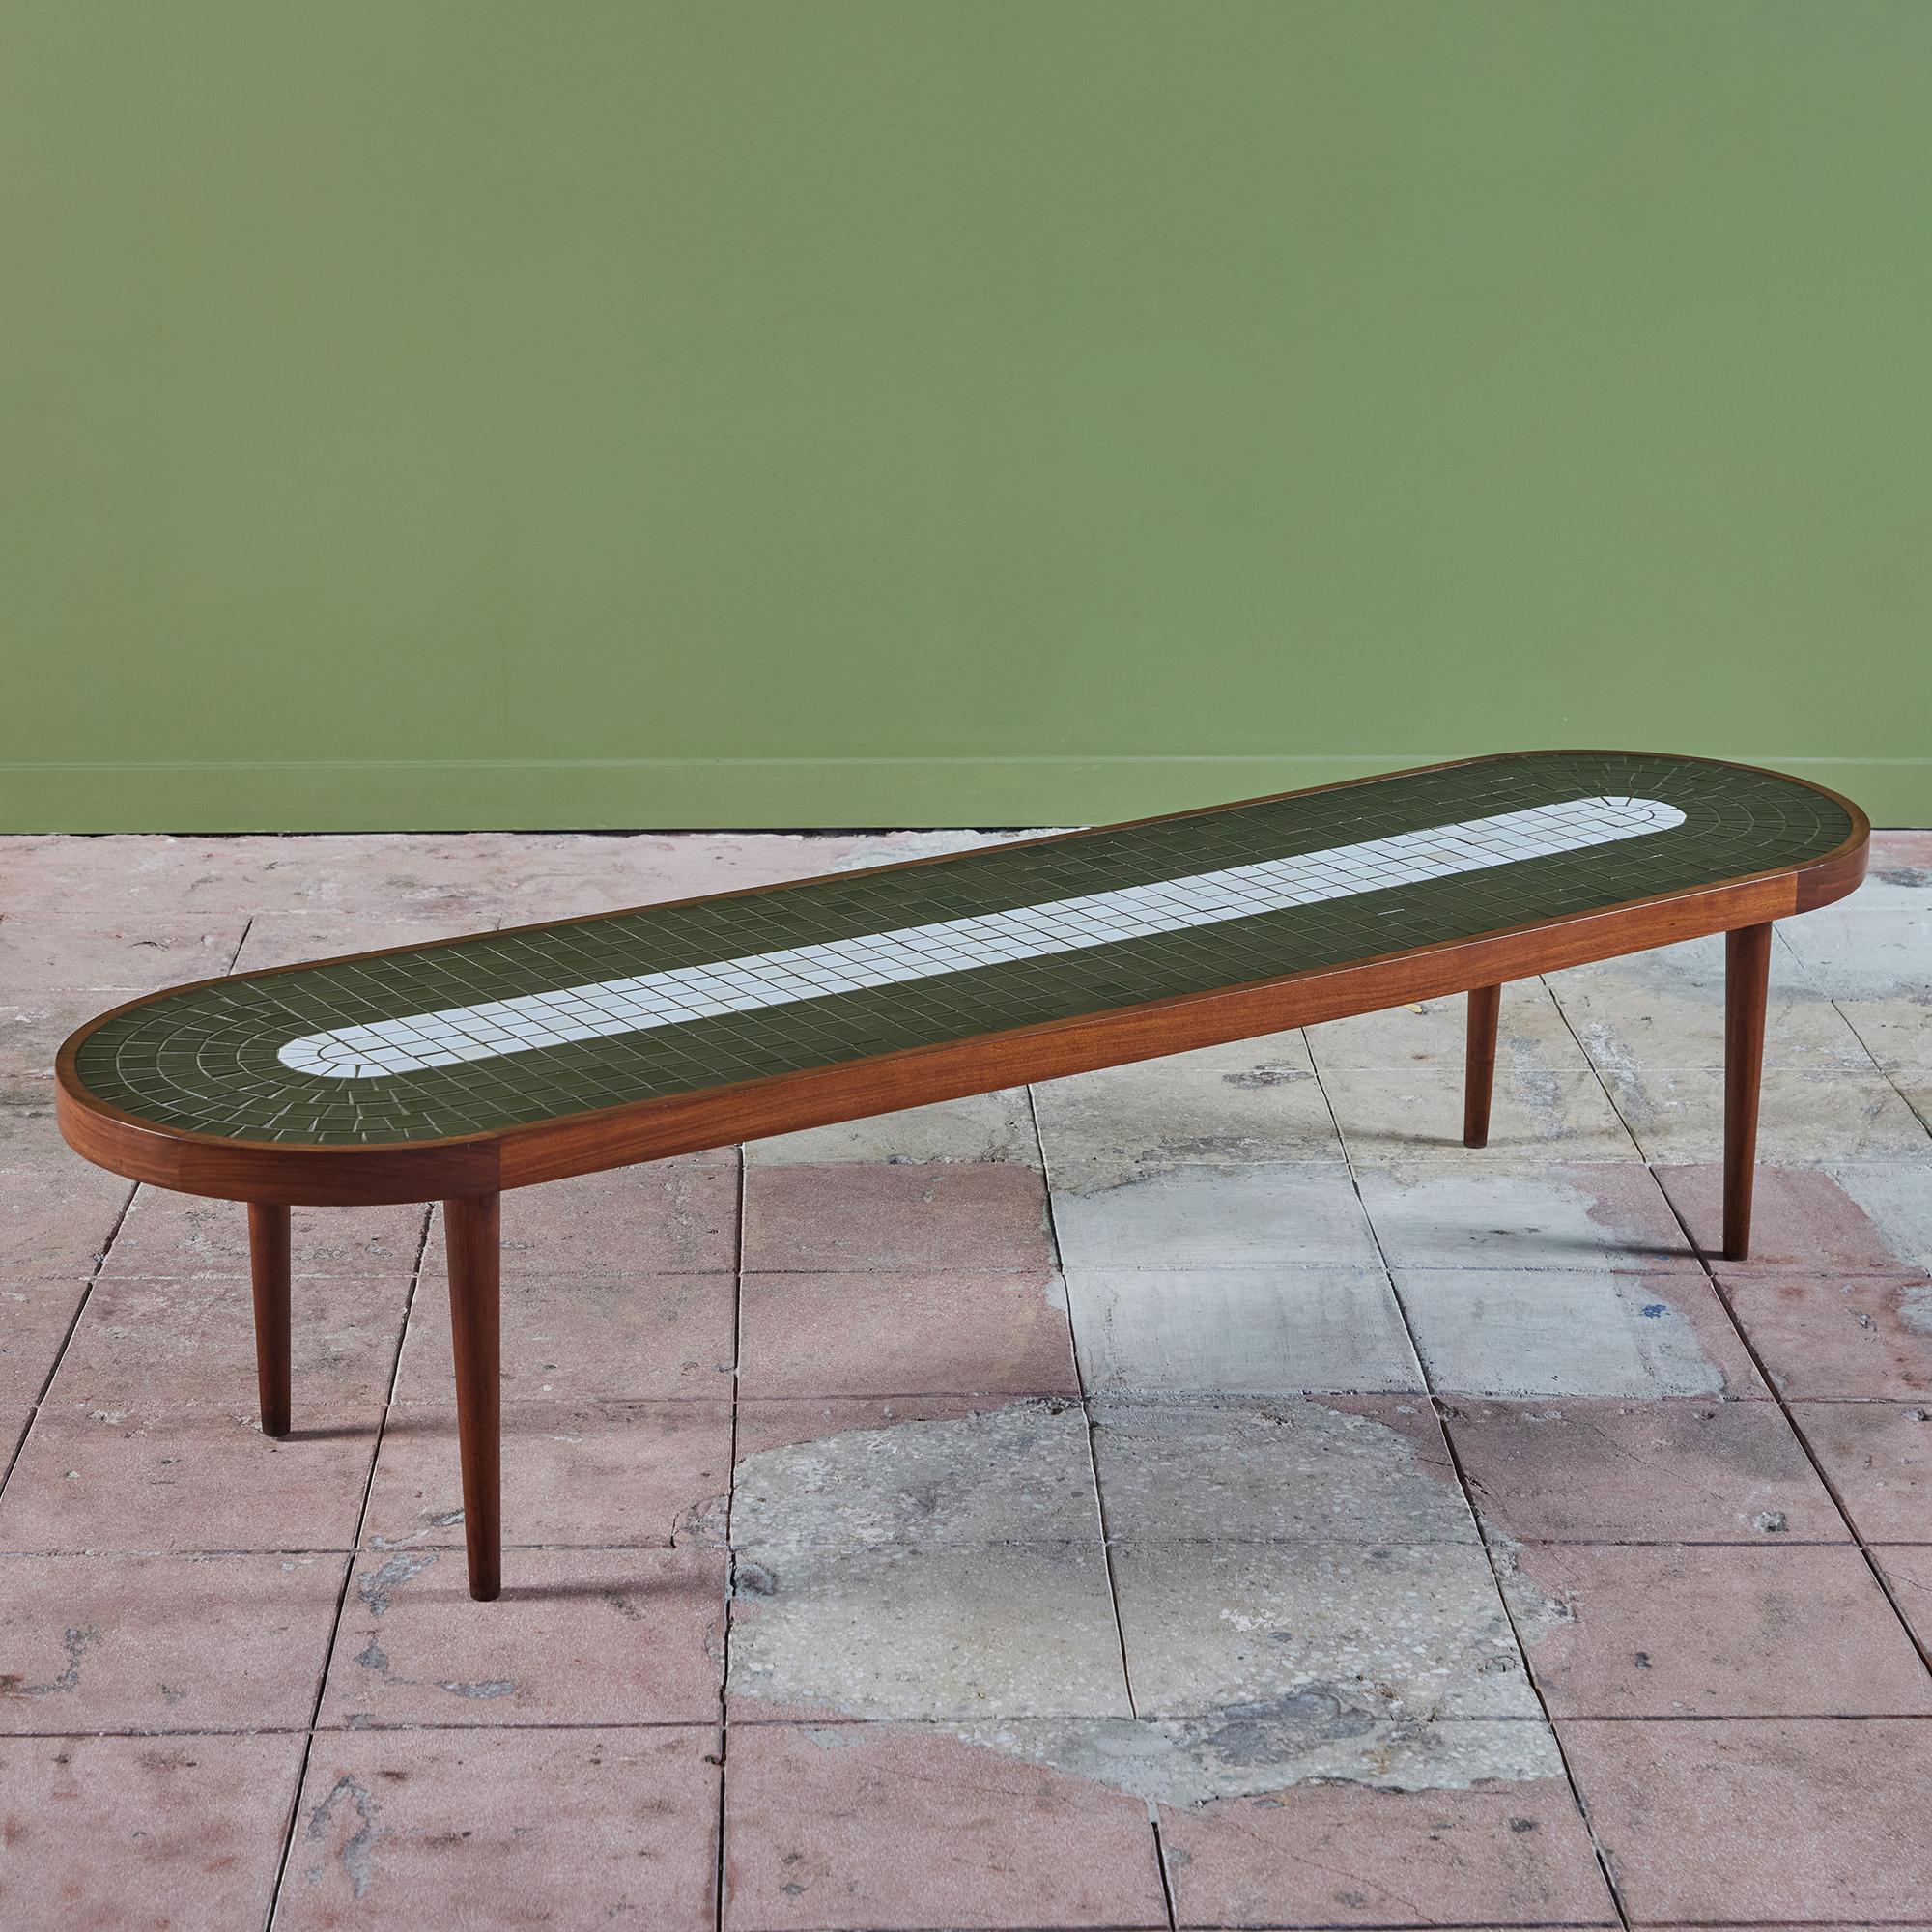 Long oval coffee table by Gordon & Jane Martz for Marshall Studios. The table top is inlaid with black and white square ceramic tiles. The frame of the table and four legs are solid walnut.

Dimensions
72.75